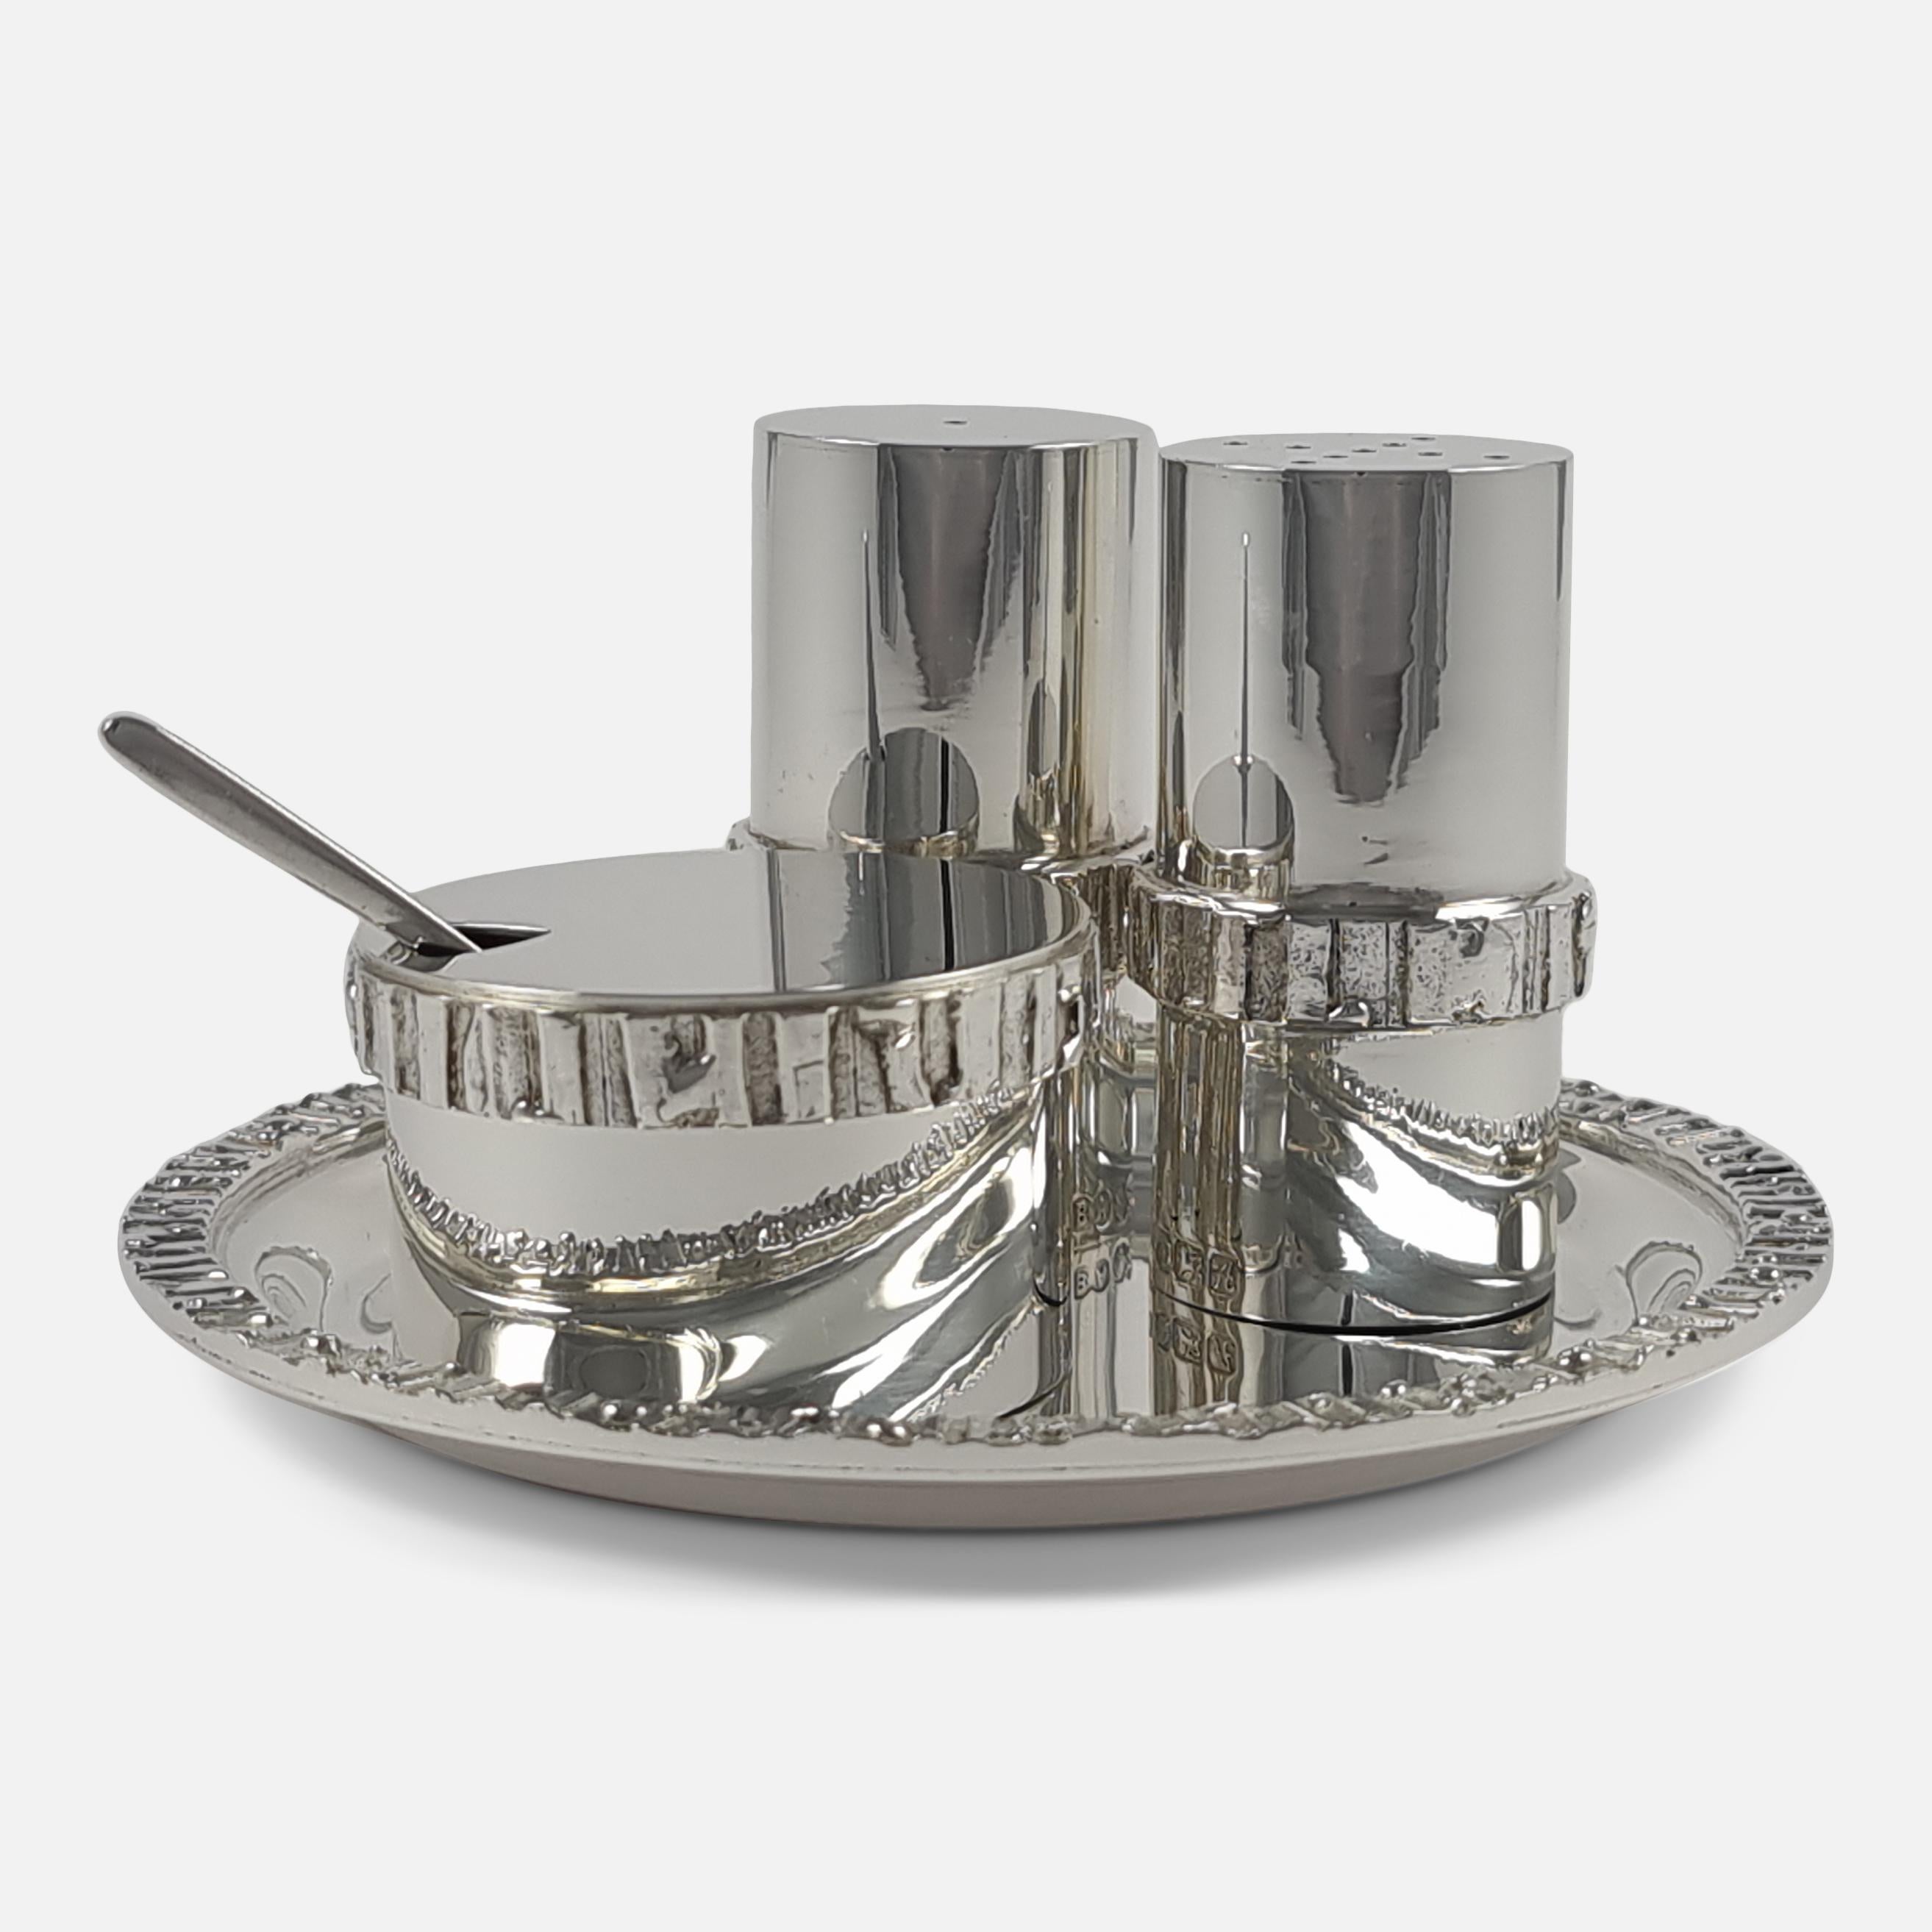 An Elizabeth II sterling silver three-piece condiment set and tray, by Brian Asquith, Sheffield, 1975. The condiment set consisting of a salt and pepper shaker, mustard pot, and tray are of round form, with textured banding. The associated mustard